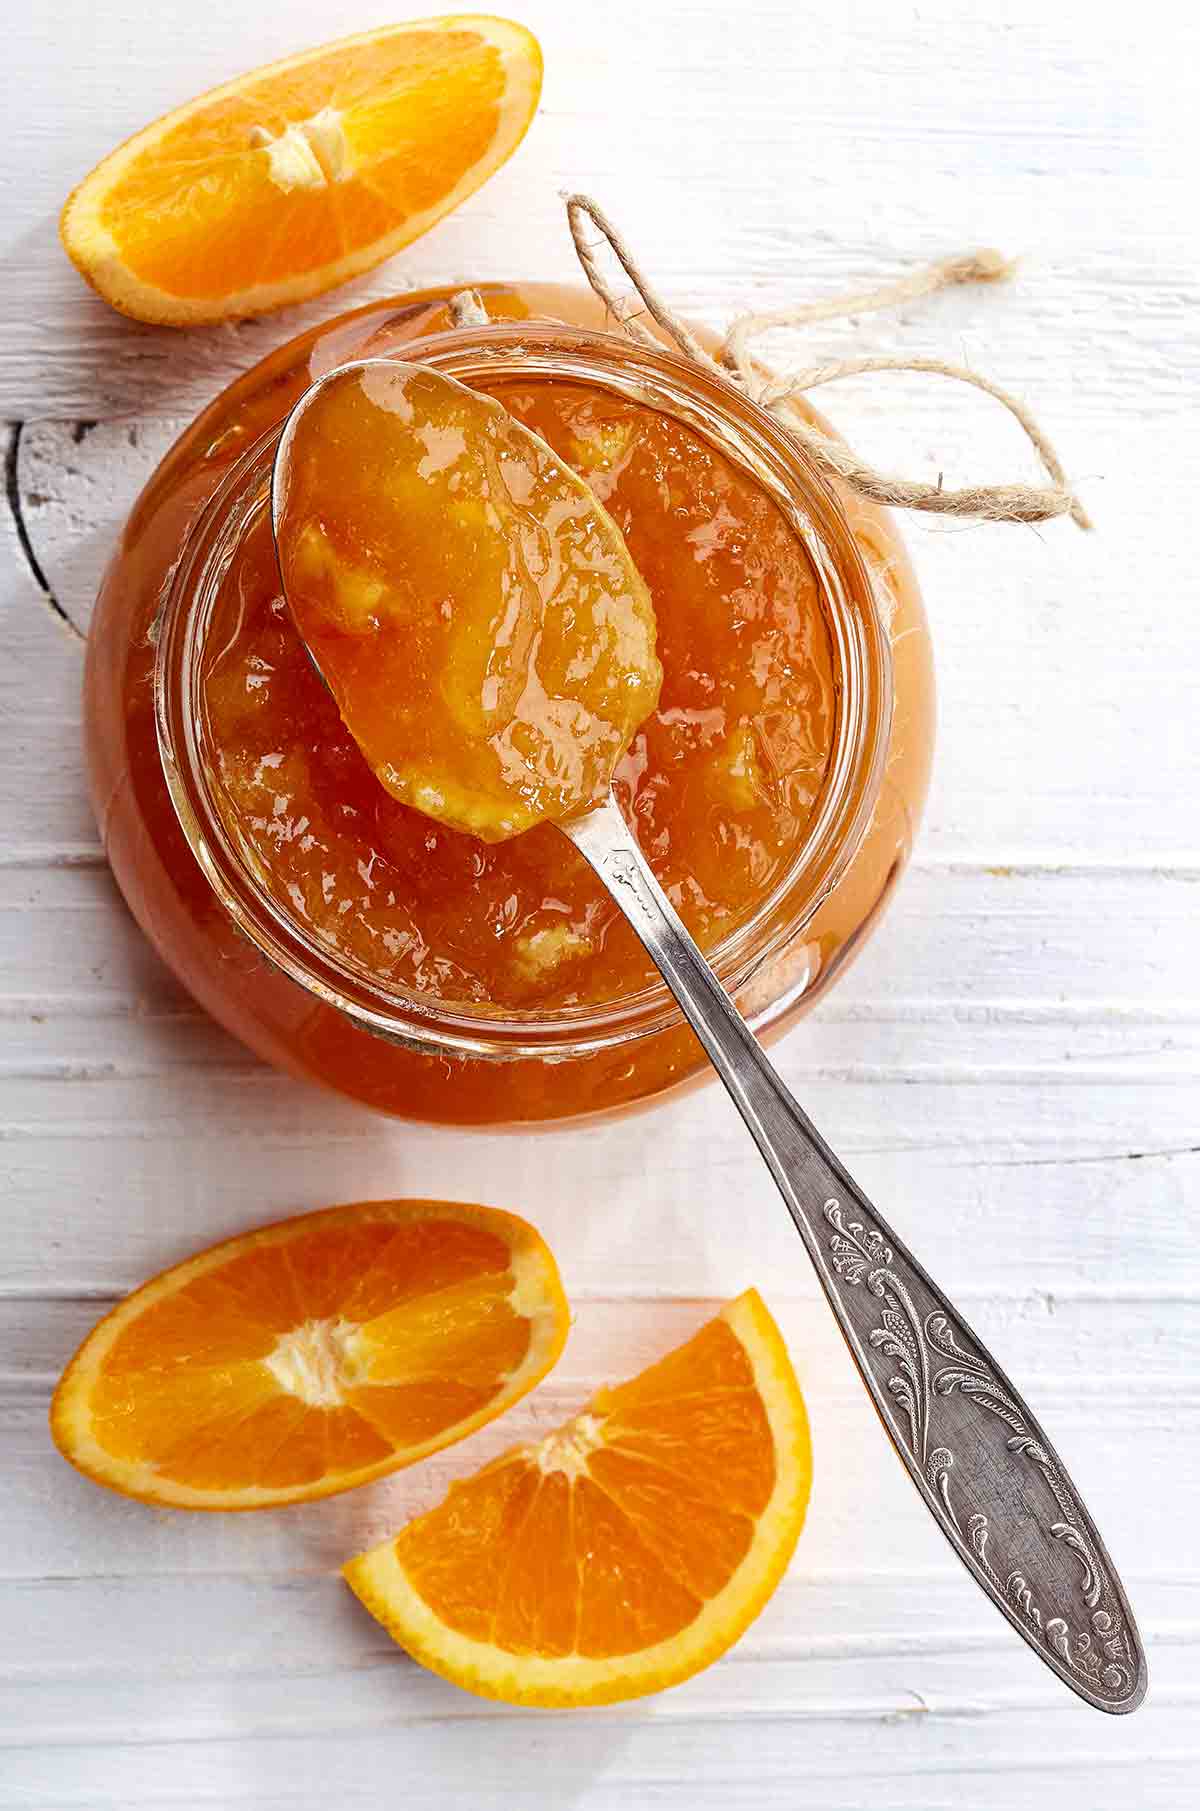 A jar of orange marmalade with a spoon resting on top and a few orange wedges beside it.